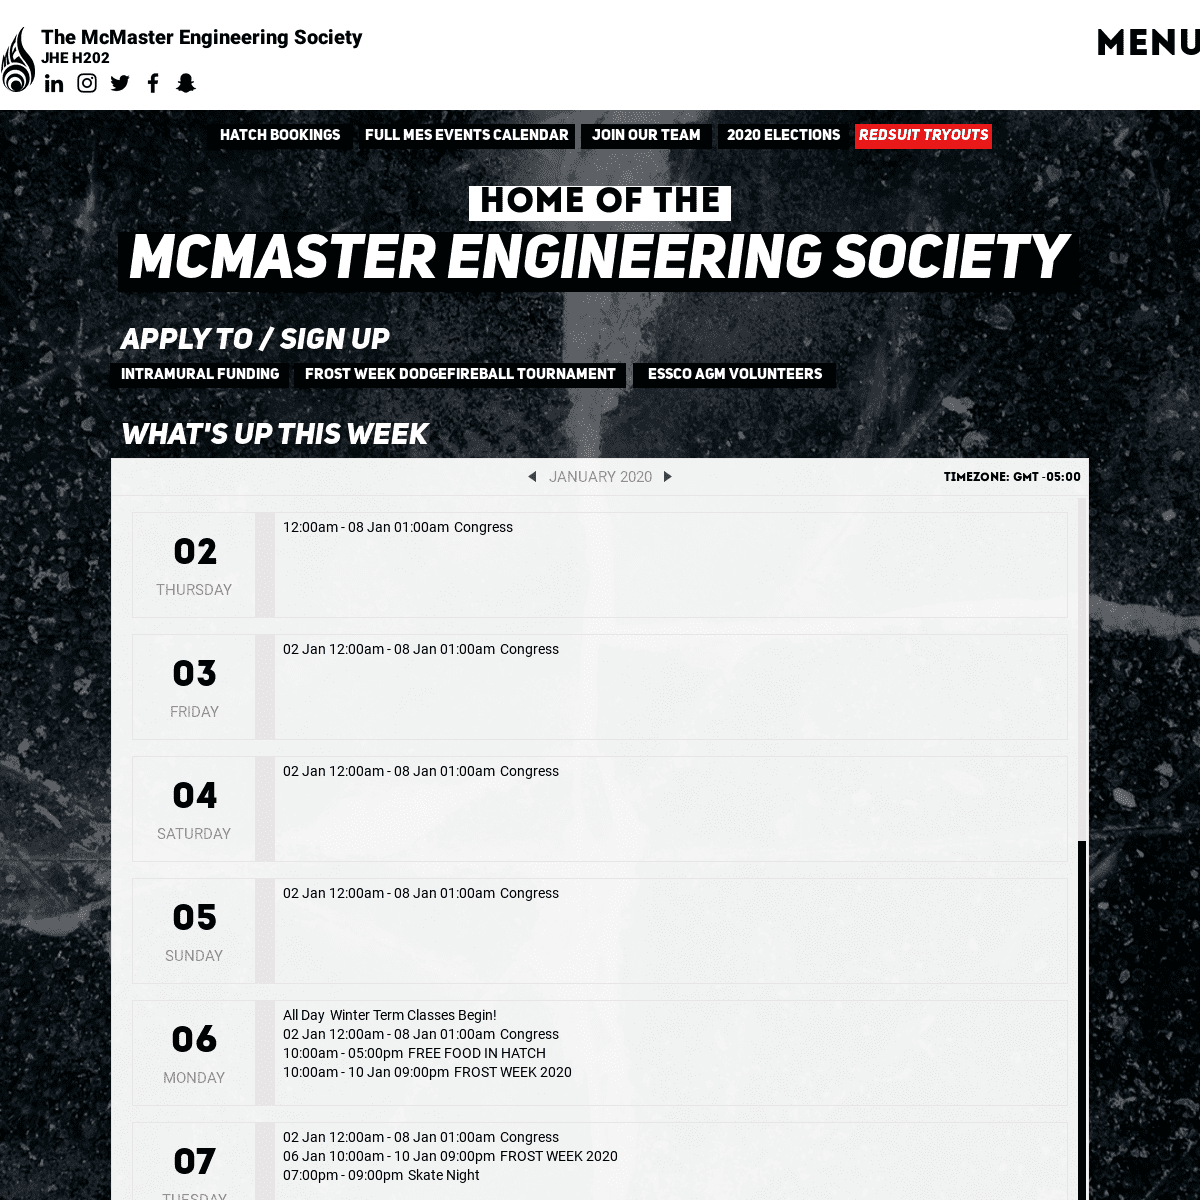 A complete backup of macengsociety.ca